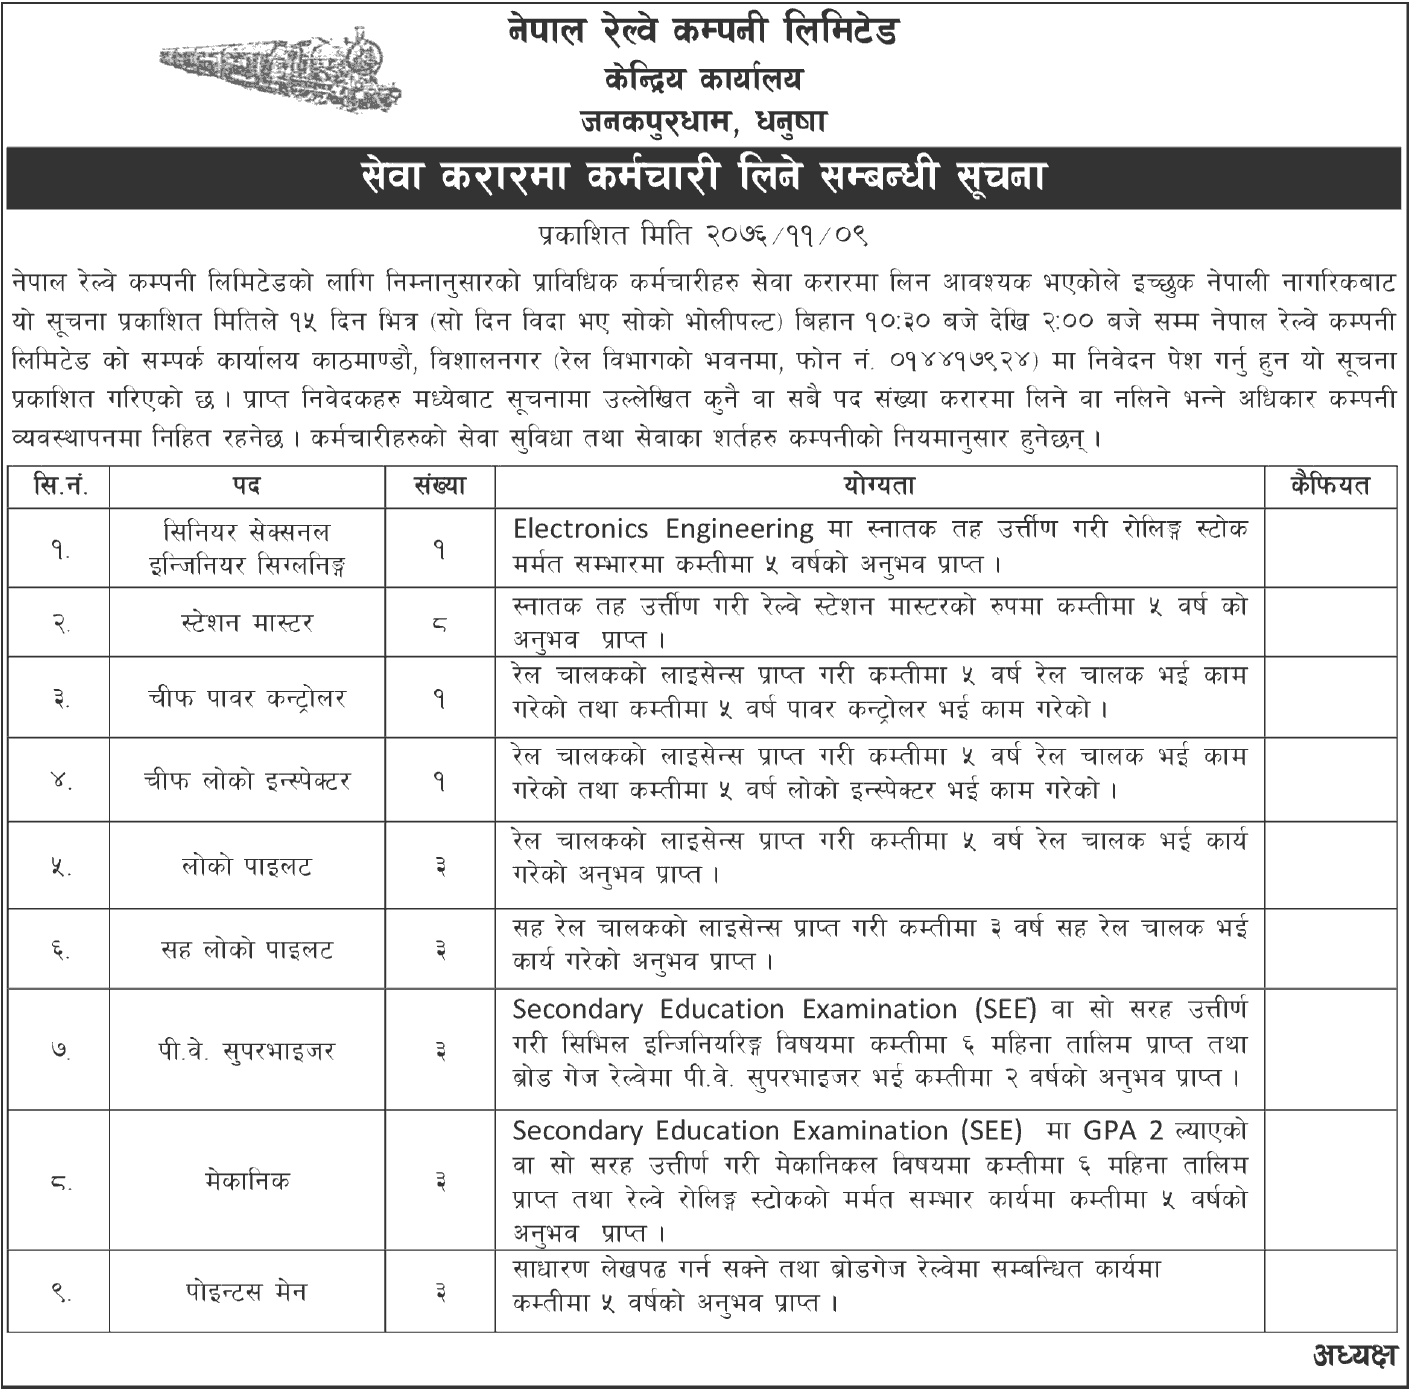 Nepal Railway Company Limited Vacancy for Various Positions